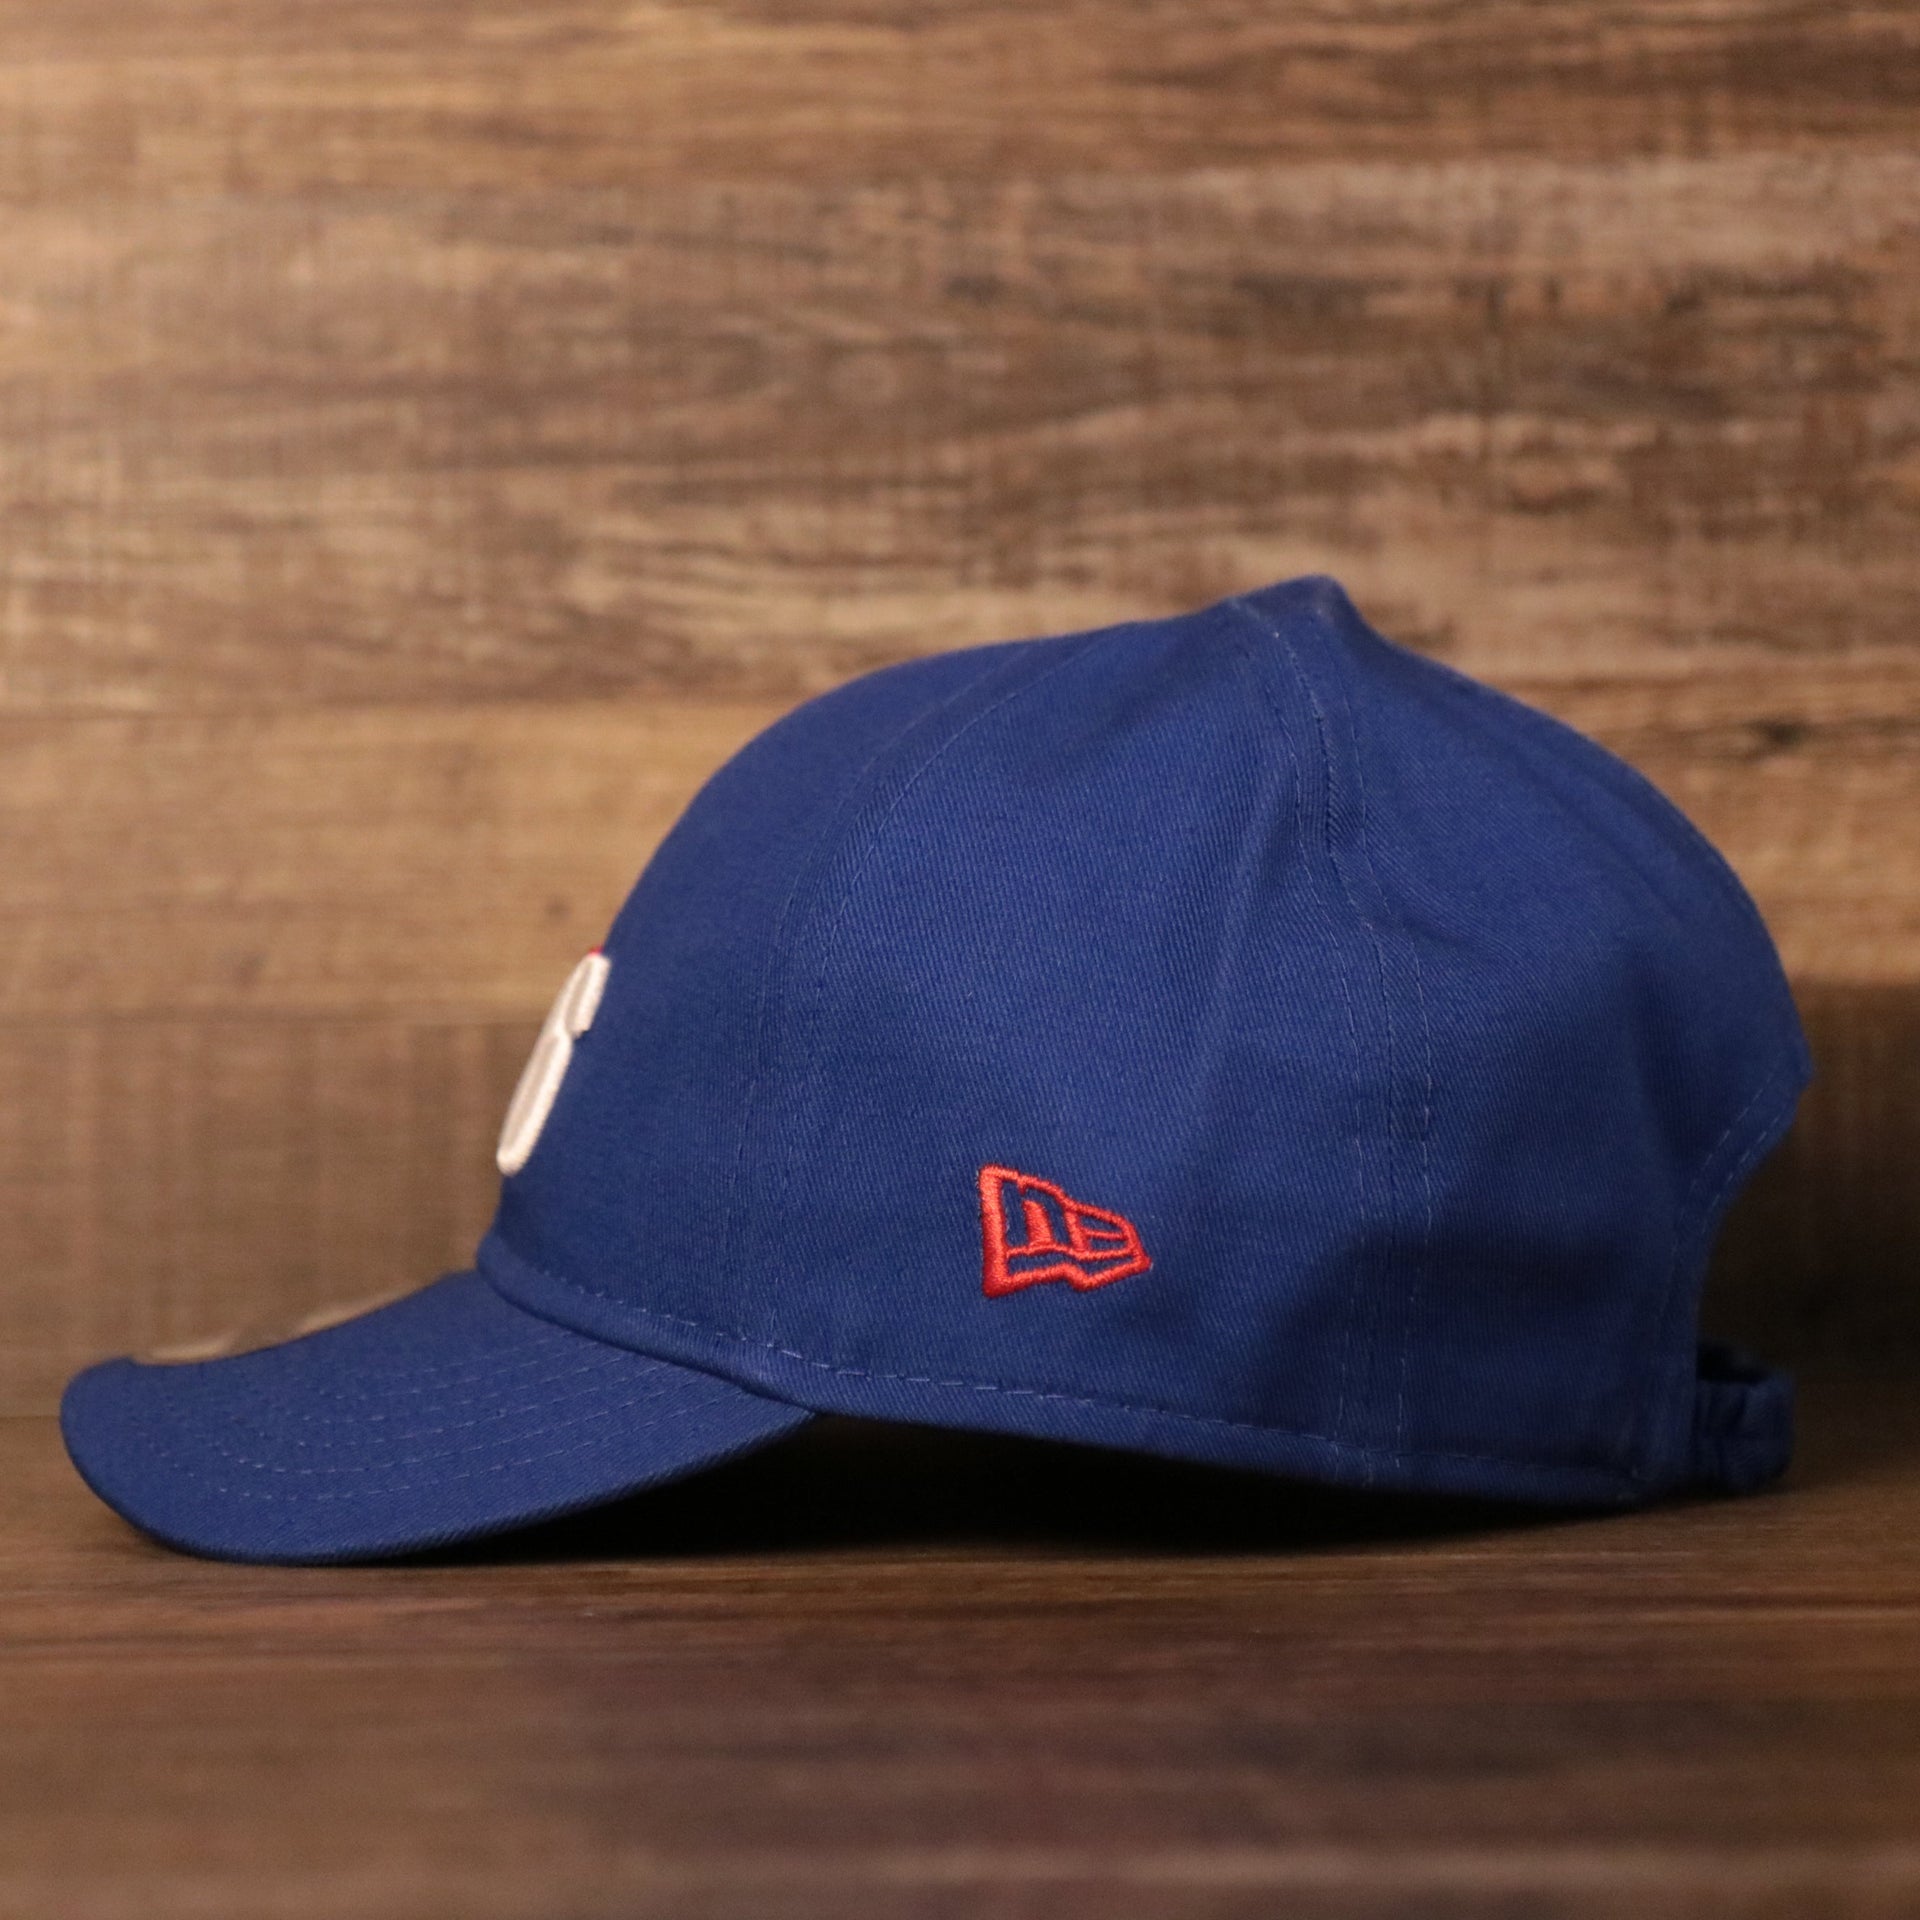 The New Era patch on the left side of the royal blue sixers toddler ball cap.